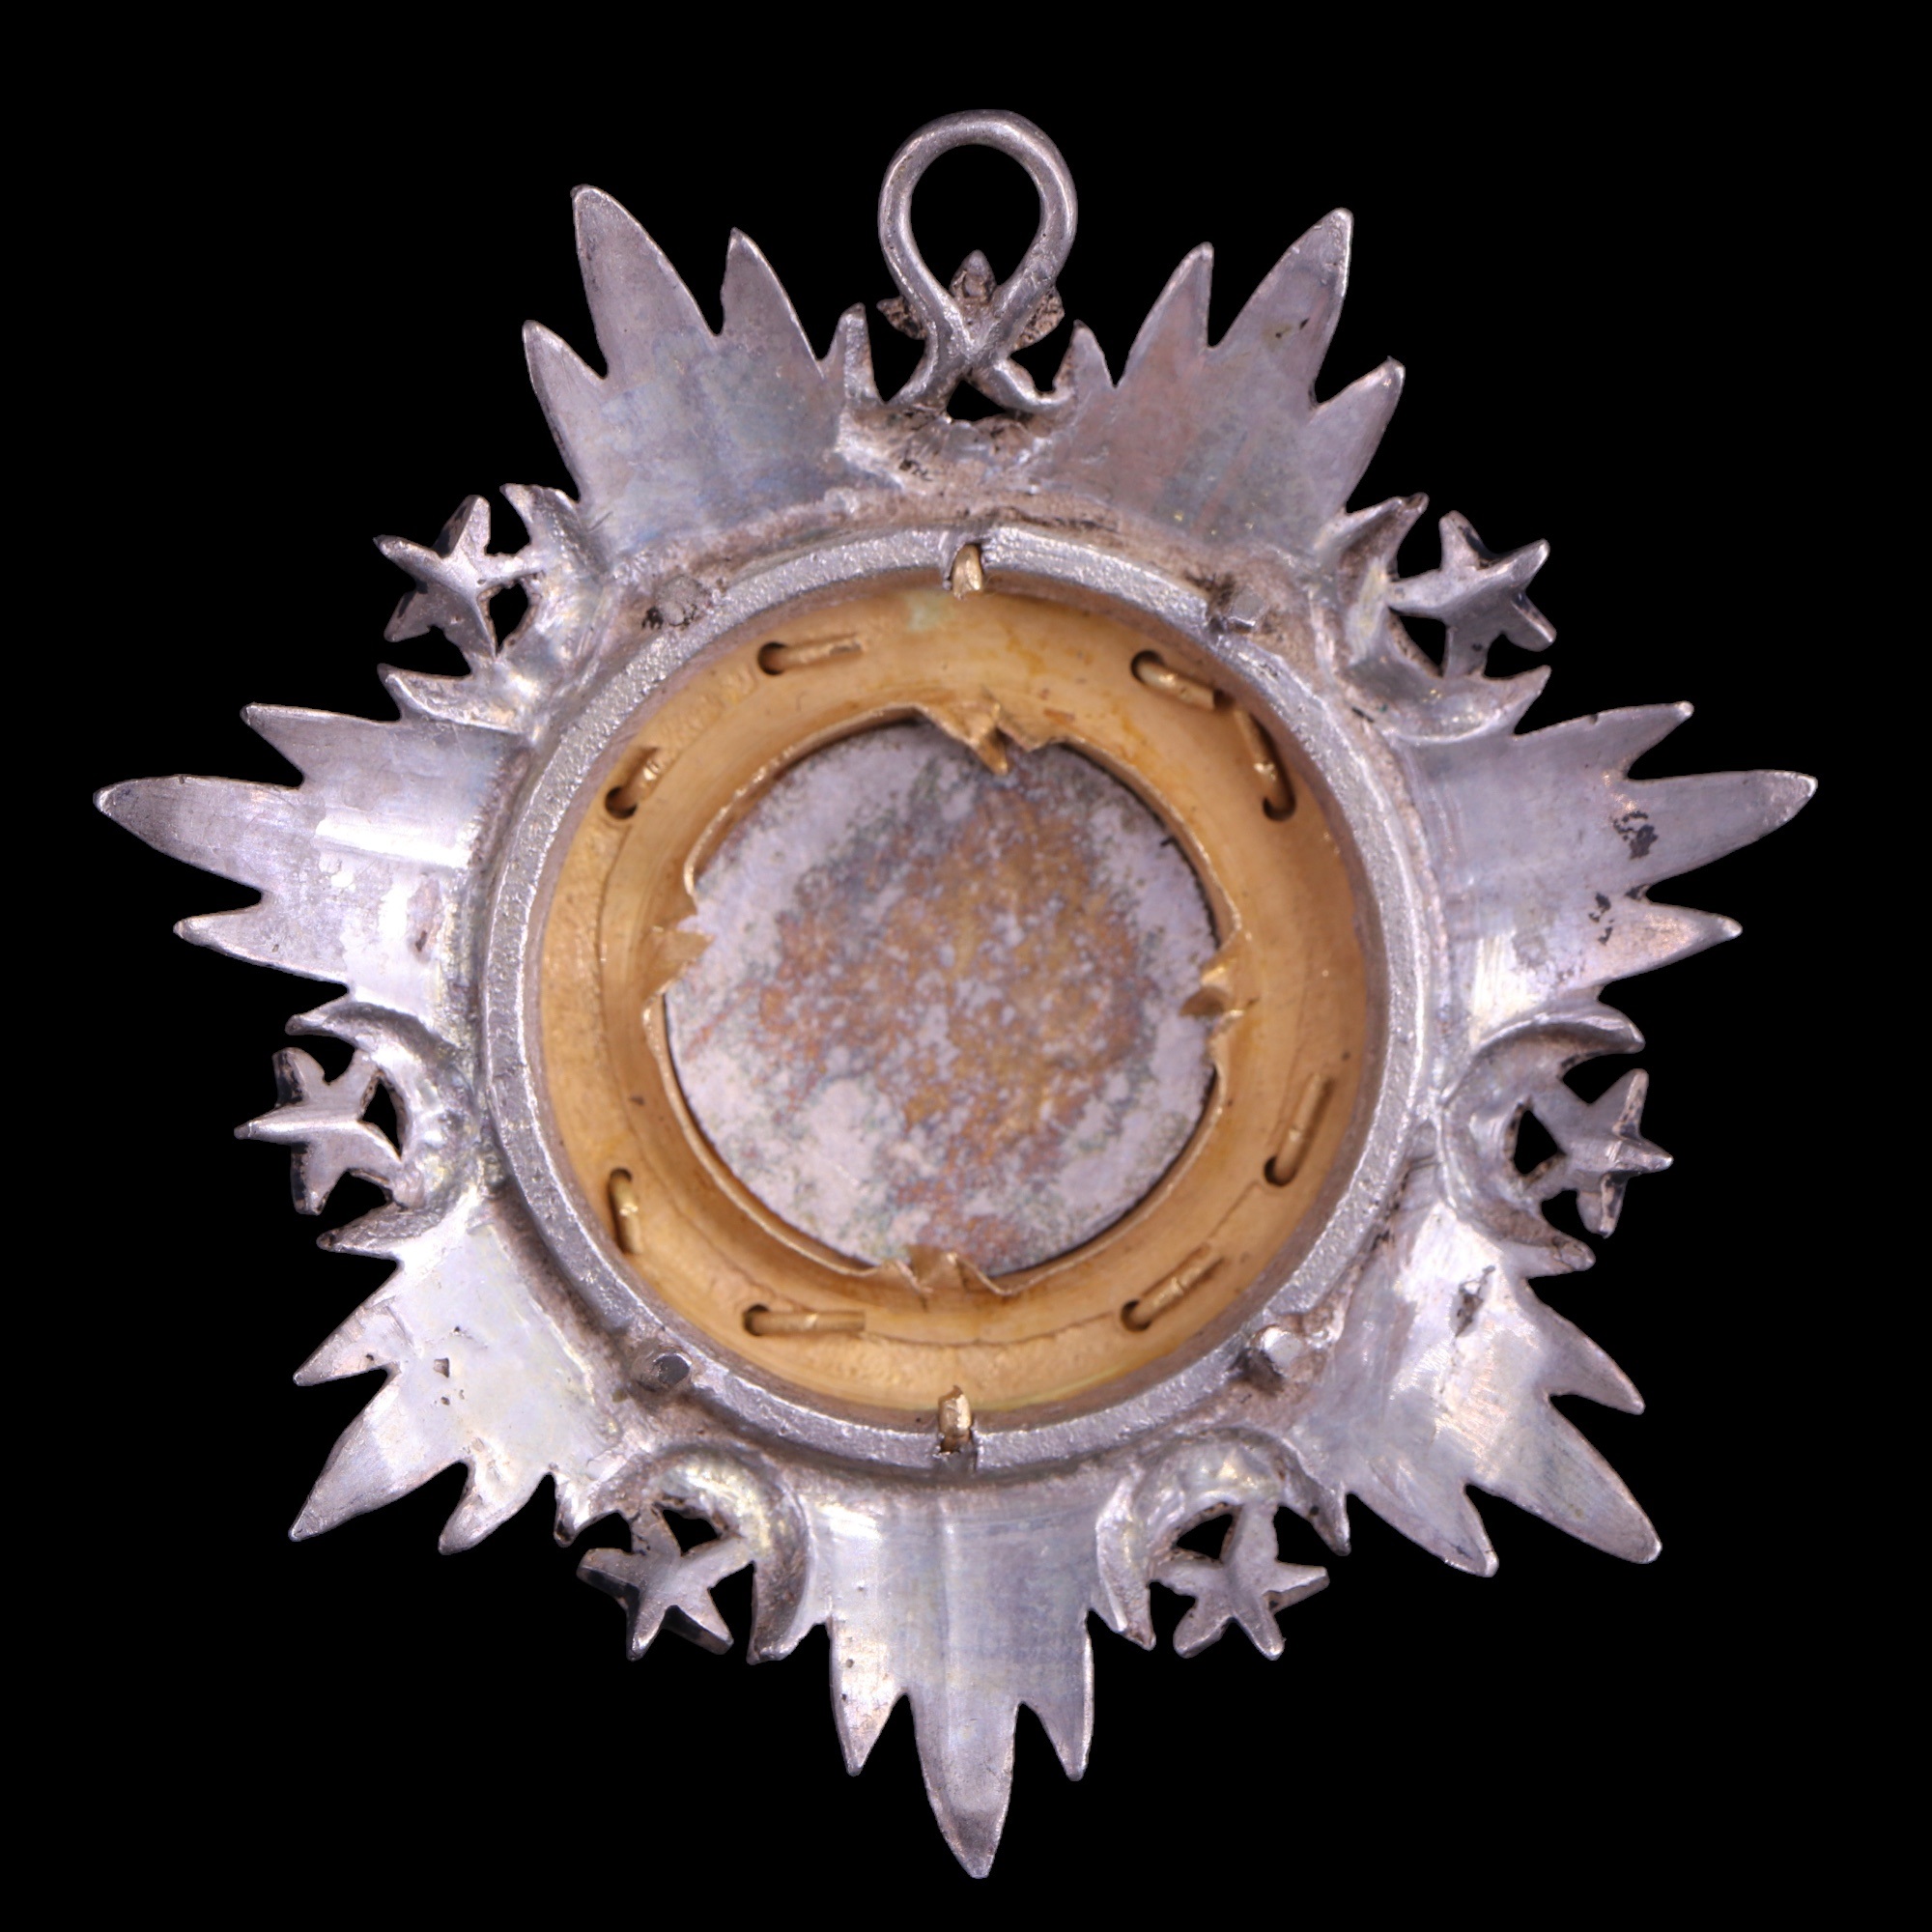 An Ottoman Turkish Order of the Medjidie - Image 2 of 2